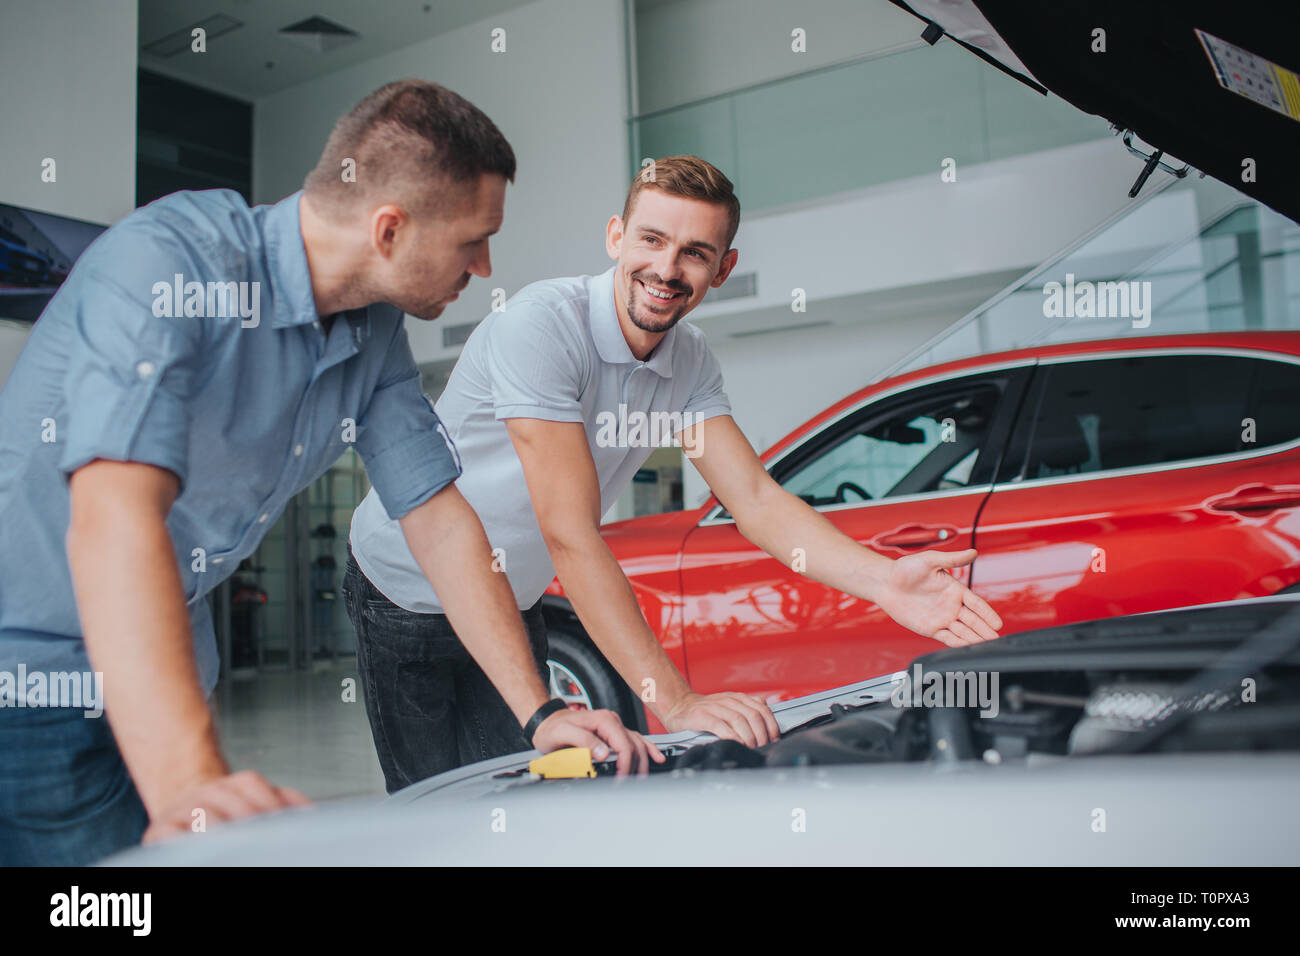 Seller in white sirt stands at opened body of car and point on it. He looks at guy and smiles. Man in grey shirt leans on car and looks at seller. He  Stock Photo